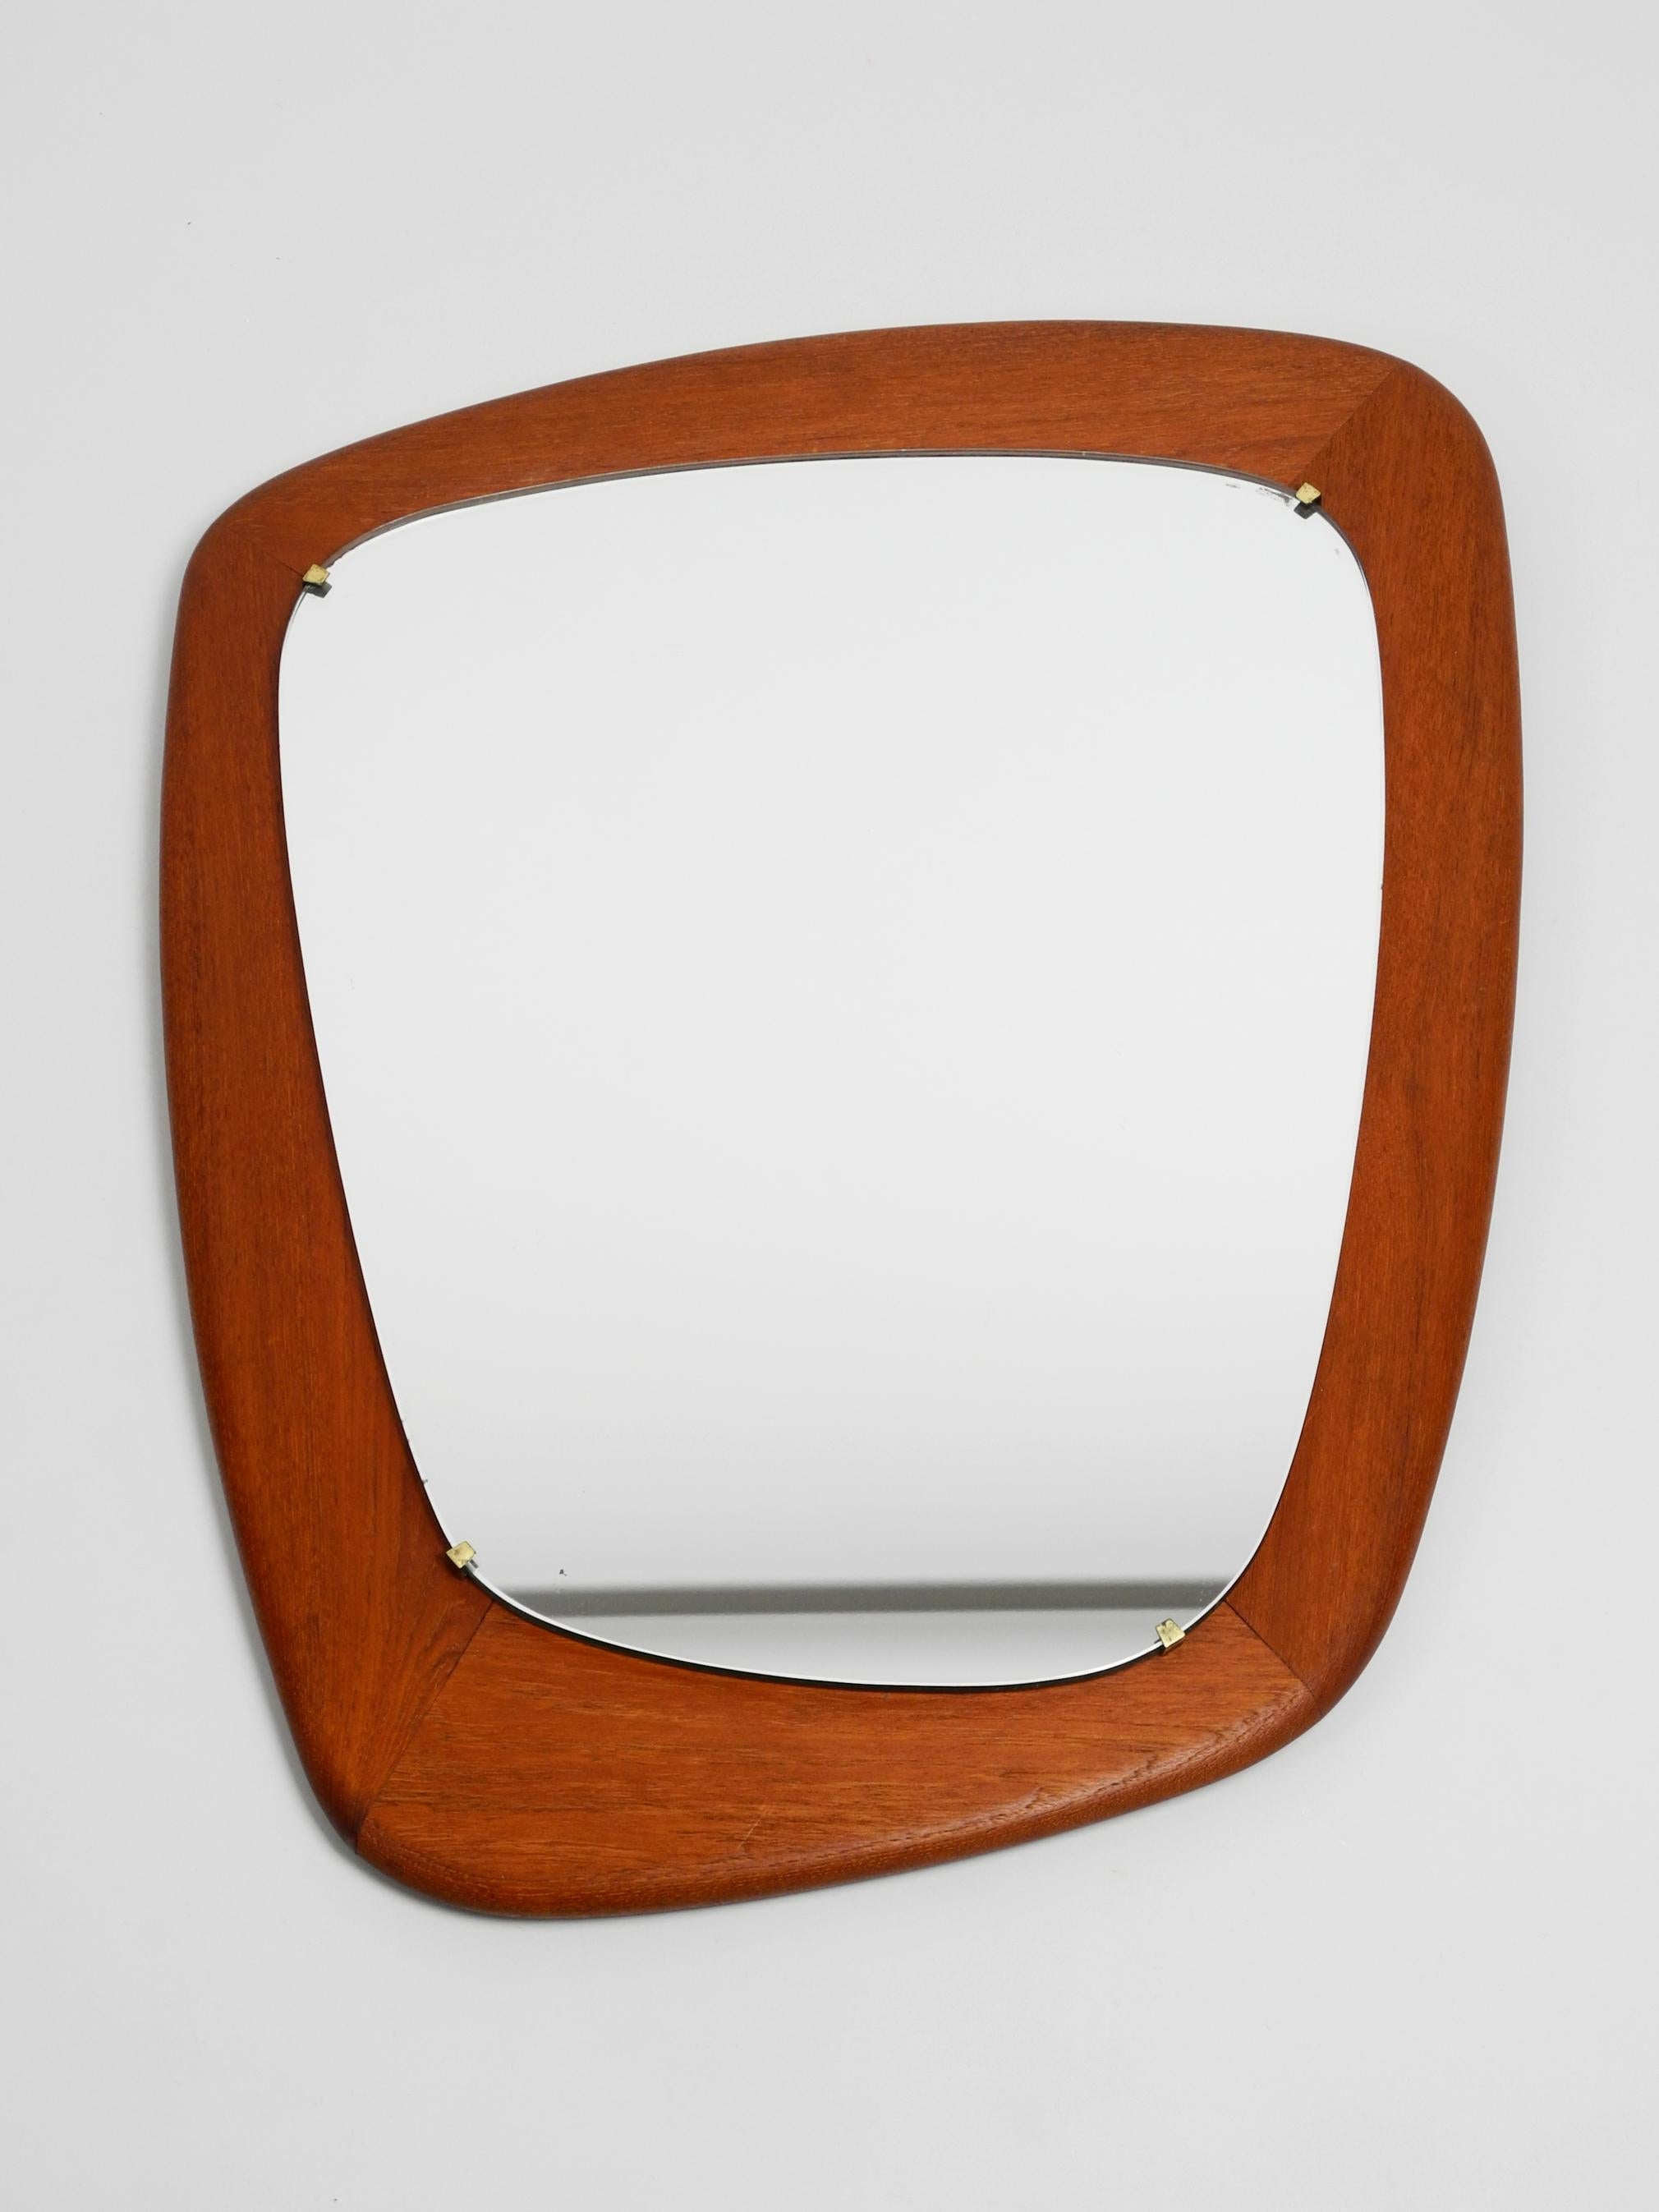 Gorgeous rare large midcentury teak wall mirror.
Very elaborately manufactured, the mirror is made of crystal glass 
and is hold with 4hooks on the outside of the thick frame.
The frame and mirror are built asymmetrically.
High quality